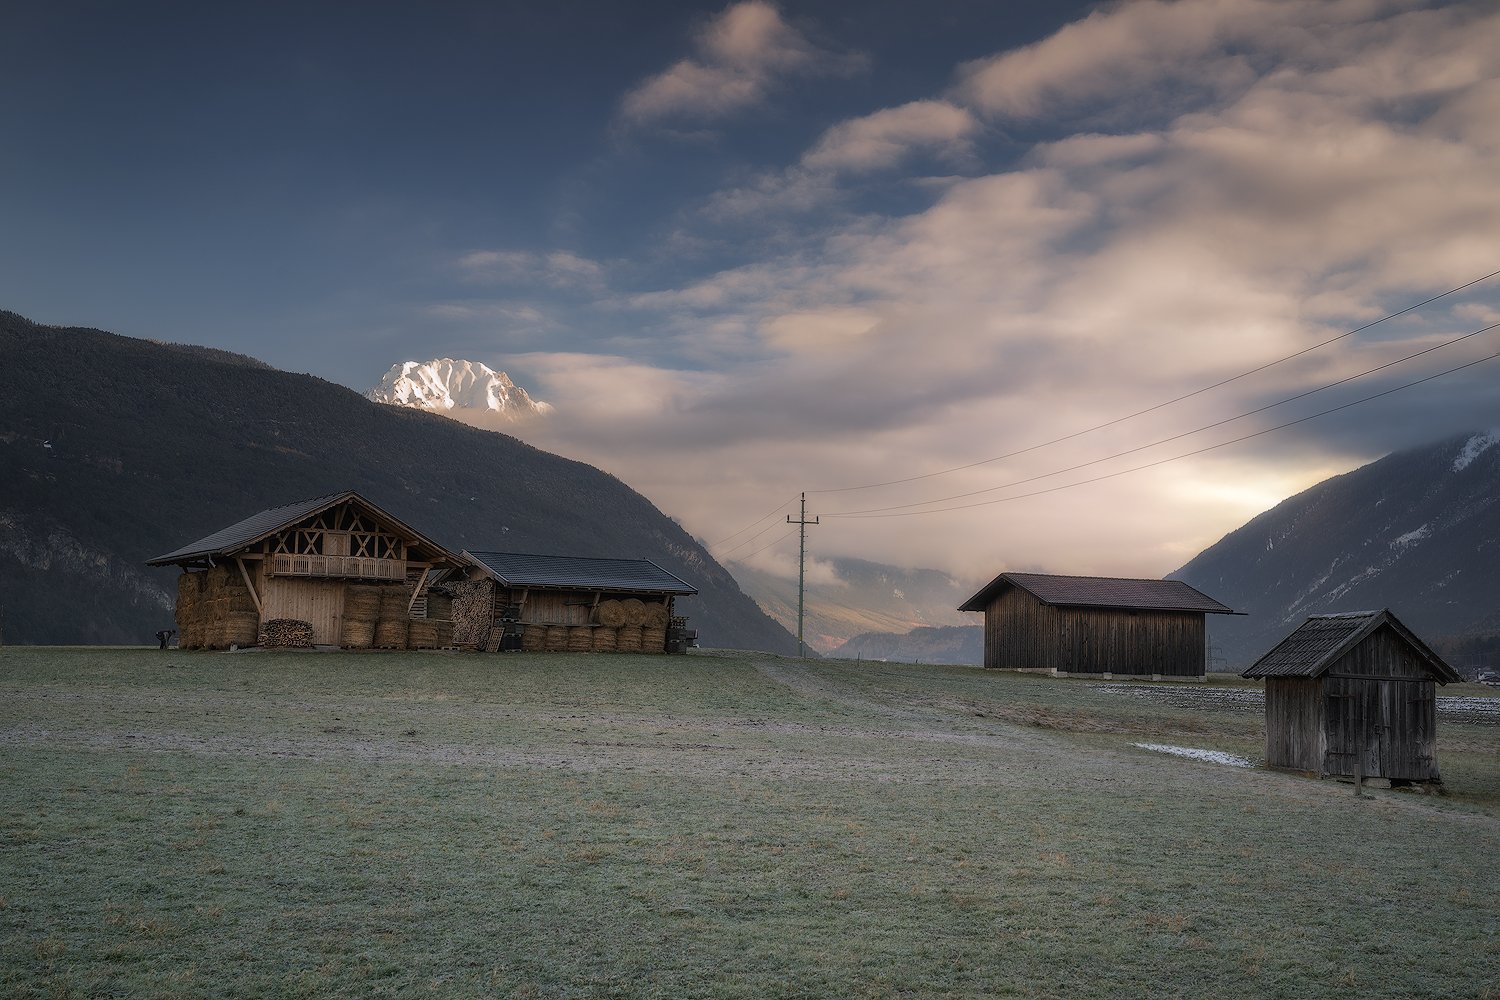 acres, agicutural building, agriculture, alps, austria, austrian alps, balcony, barns, clouds, farmhouse, forest, frost, frosty, fruit trees, gurgltal, hauses, hey barns, hill, hills, huts, imst, landscape, log cabin, meadows, morning, morning glow, moult, Ludwig Riml